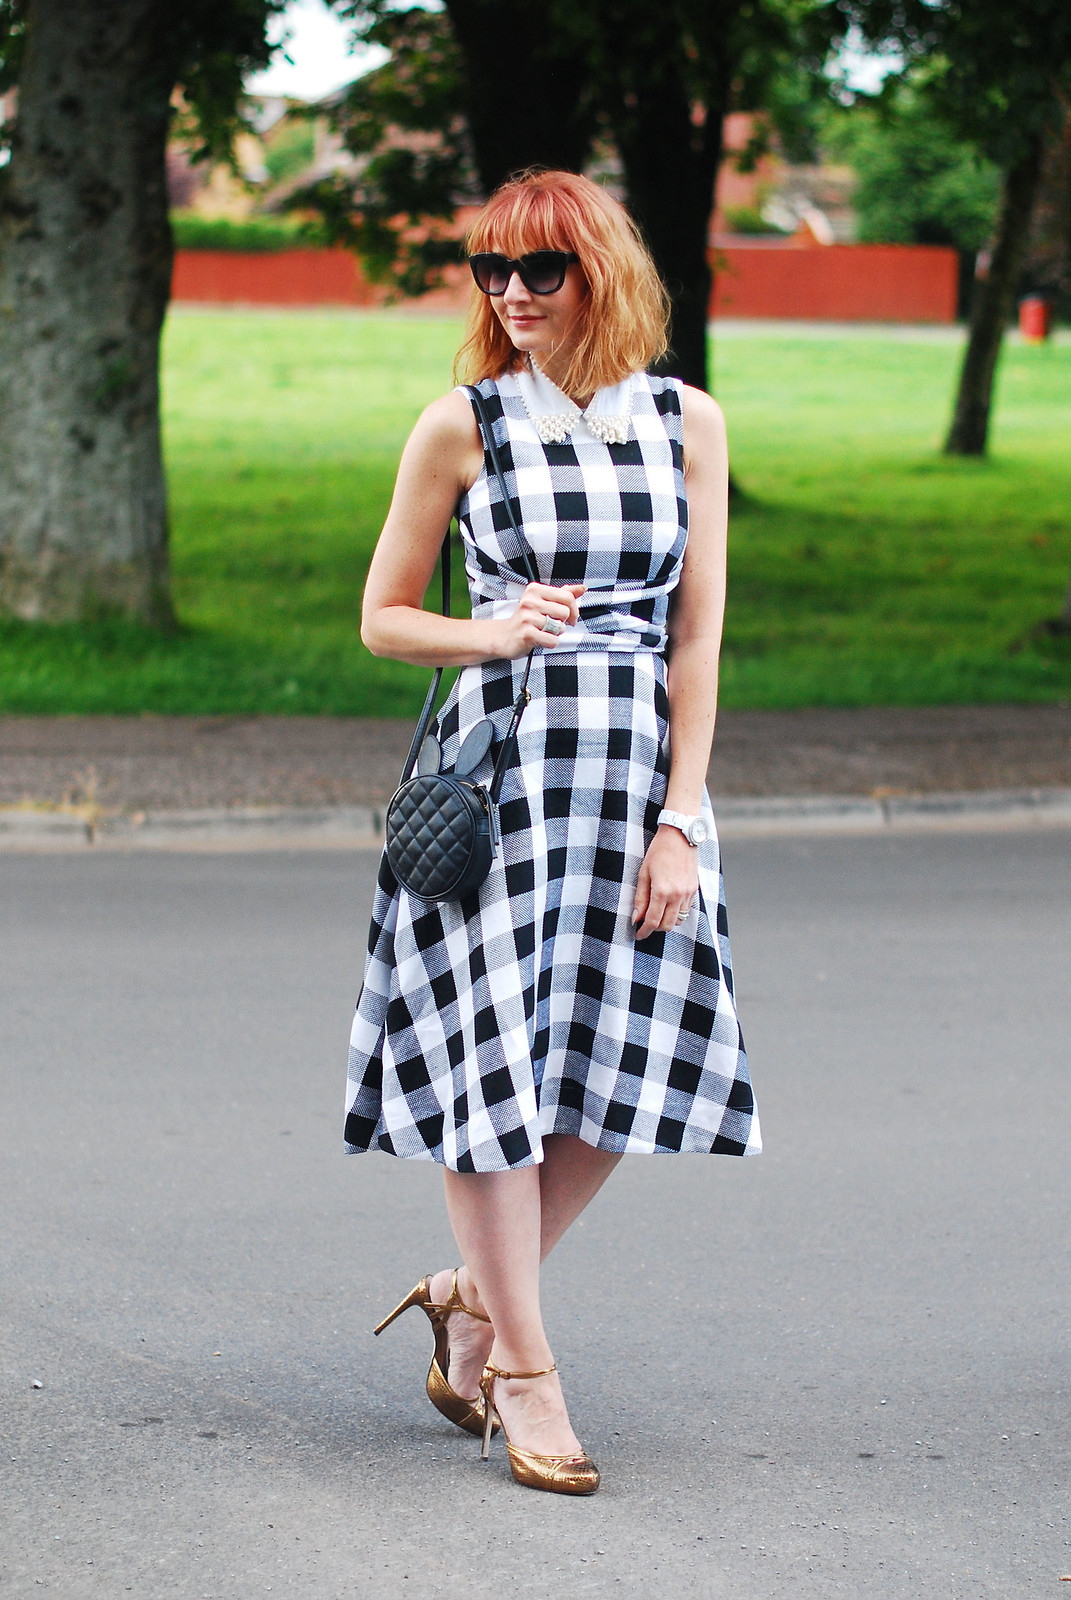 Classic summer dressing: Bardot-style gingham dress, bronze heels, pearl embellished collar | Not Dressed As Lamb